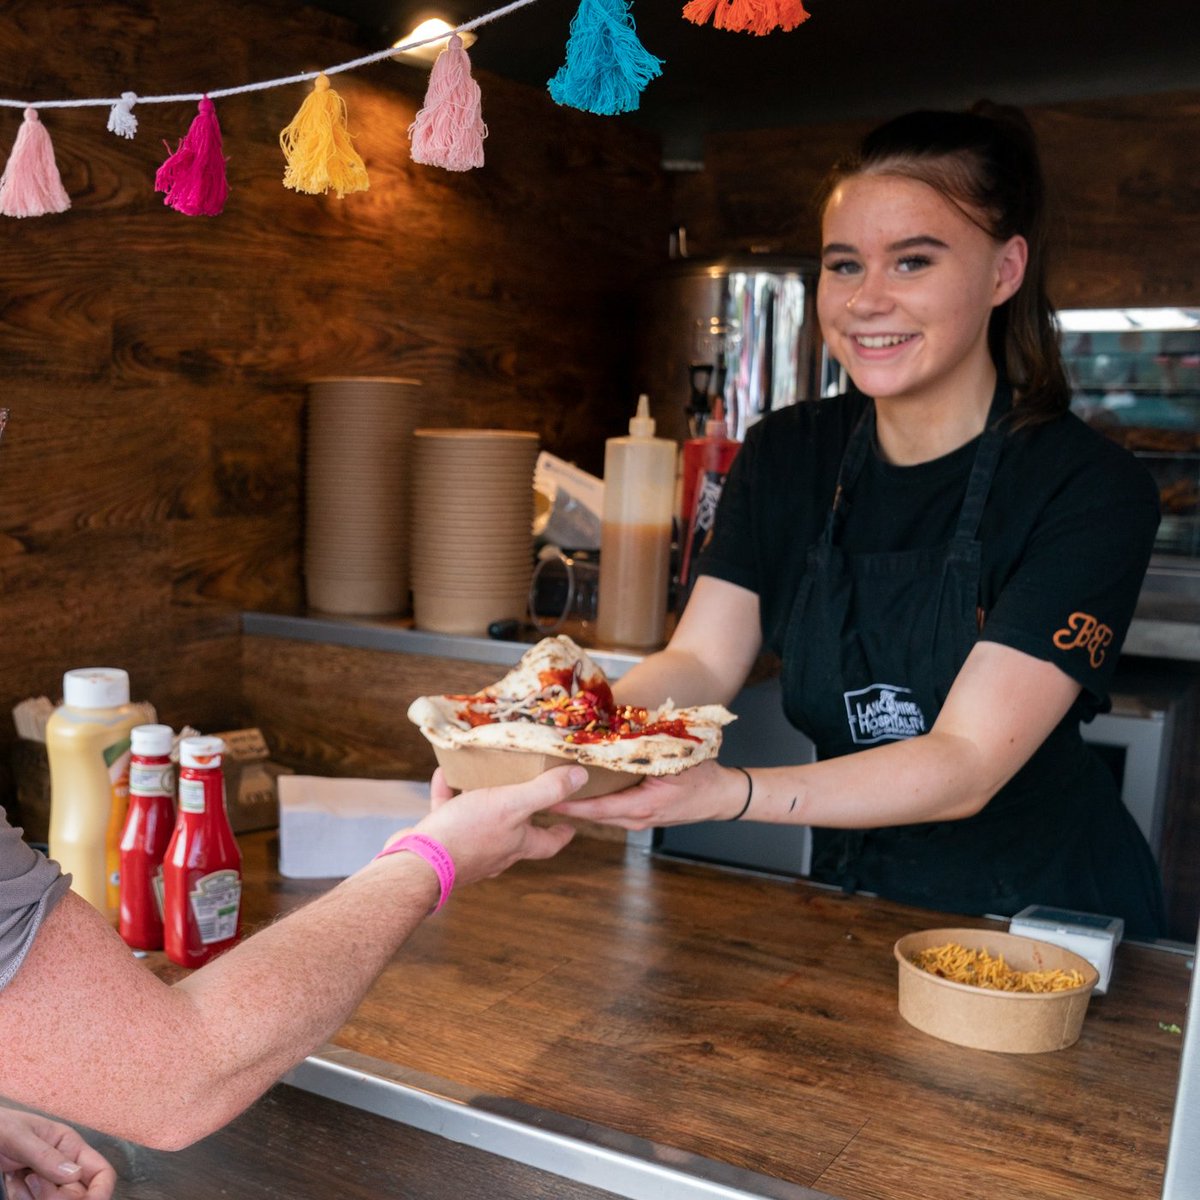 📢Food traders can apply to be part of this year’s festival. 😋Interested? 📨 To request an application form email FeelGoodFestival@rochdale.gov.uk and put ‘Food trader application’ in the subject line. Completed forms must be received by 14 June #FeelGoodFest24 👨‍🍳